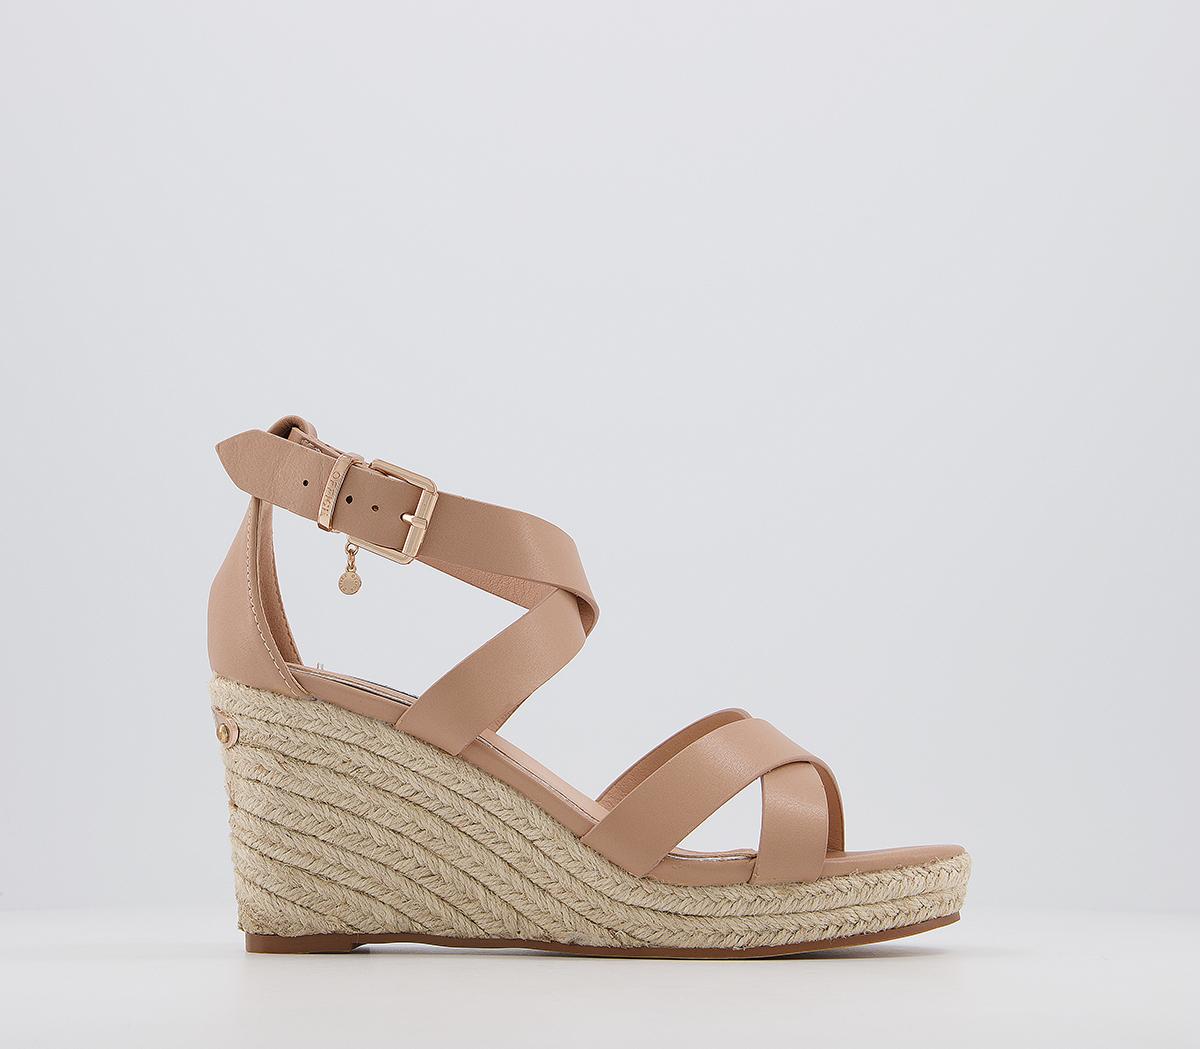 cheap nude wedges